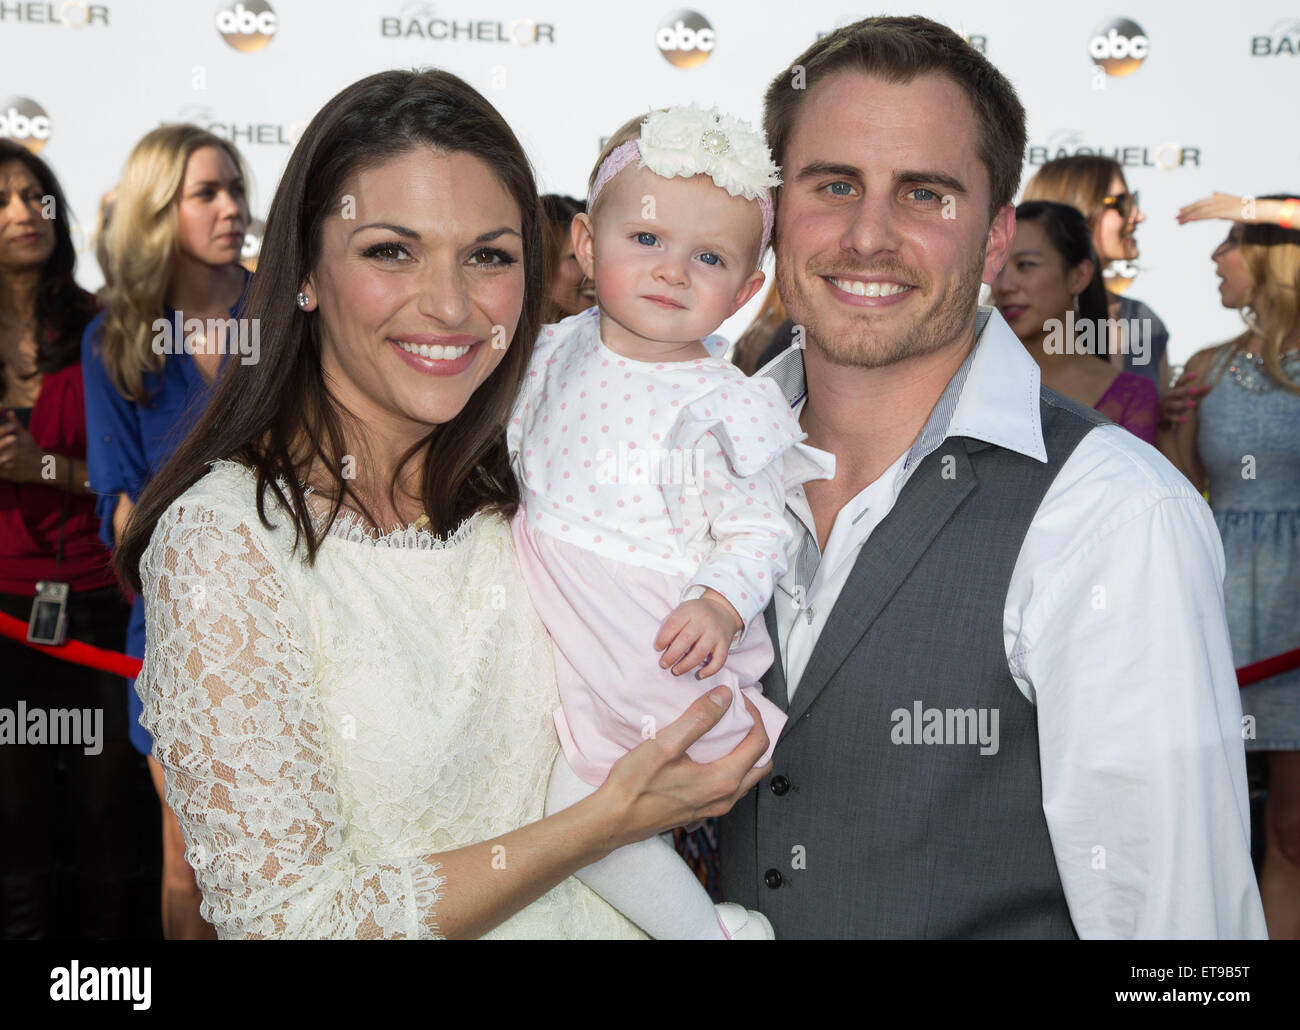 Premiere of ABC's 'The Bachelor' Season 19 at the Line 204 East Stages in Hollywood  Featuring: Deanna Stagliano, Addison Marie Stagliano, Stephen Stagliano Where: Los Angeles, California, United States When: 05 Jan 2015 Credit: Brian To/WENN.com Stock Photo